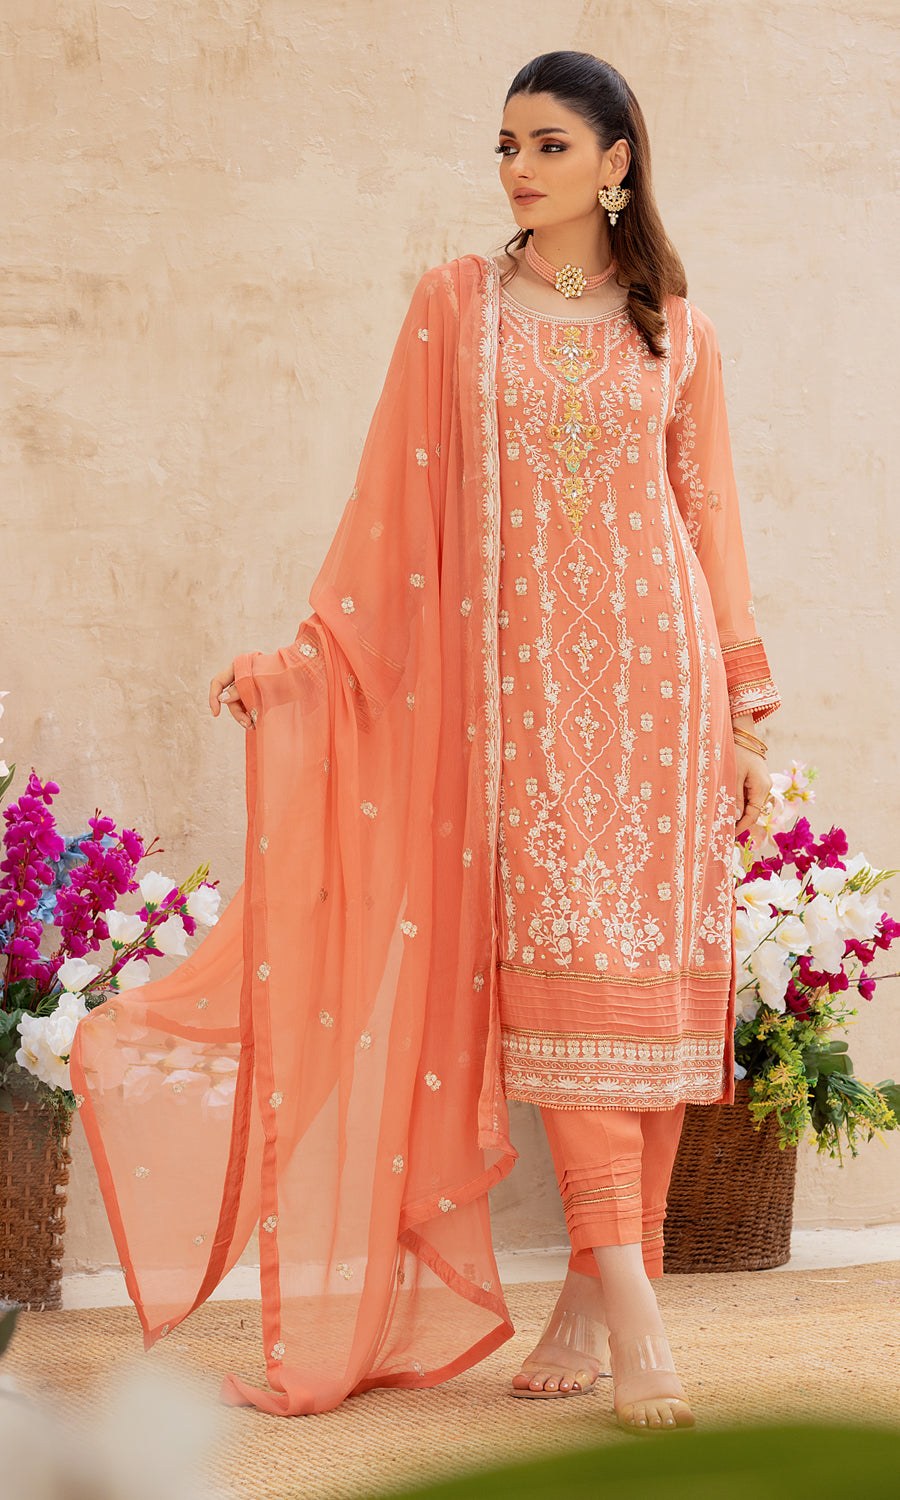 Shamooz- Mushq Volume 3. Step into elegance with style masterpiece with vibrant color and embrodiery work on the front and side panel that enhances a pop of color.The delicately hand-embellished add-on sparkle of glamour.This ensemble is a perfect balance of every occassion.